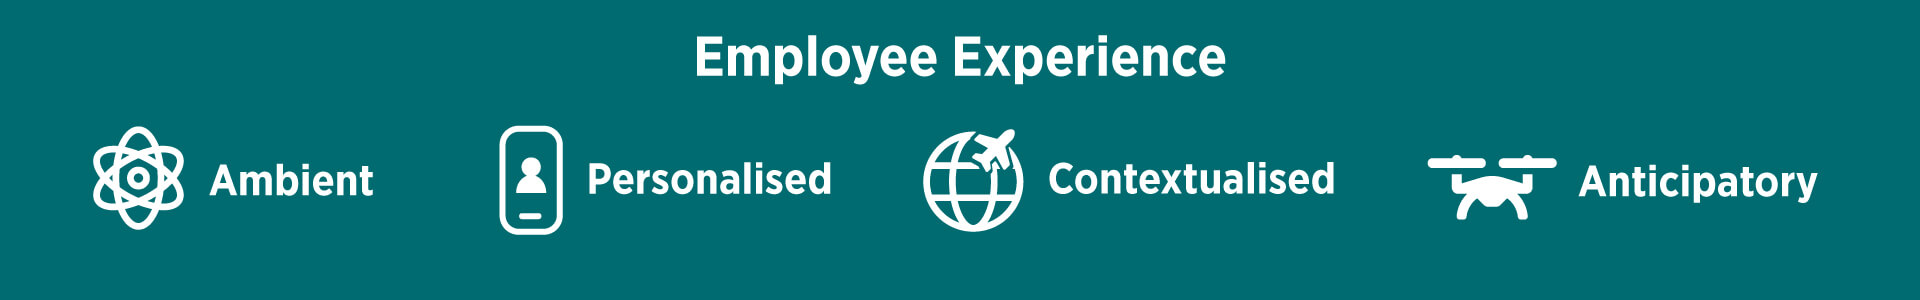 Employee Experience — Ambient, Personalised, Contextual and Anticipatory